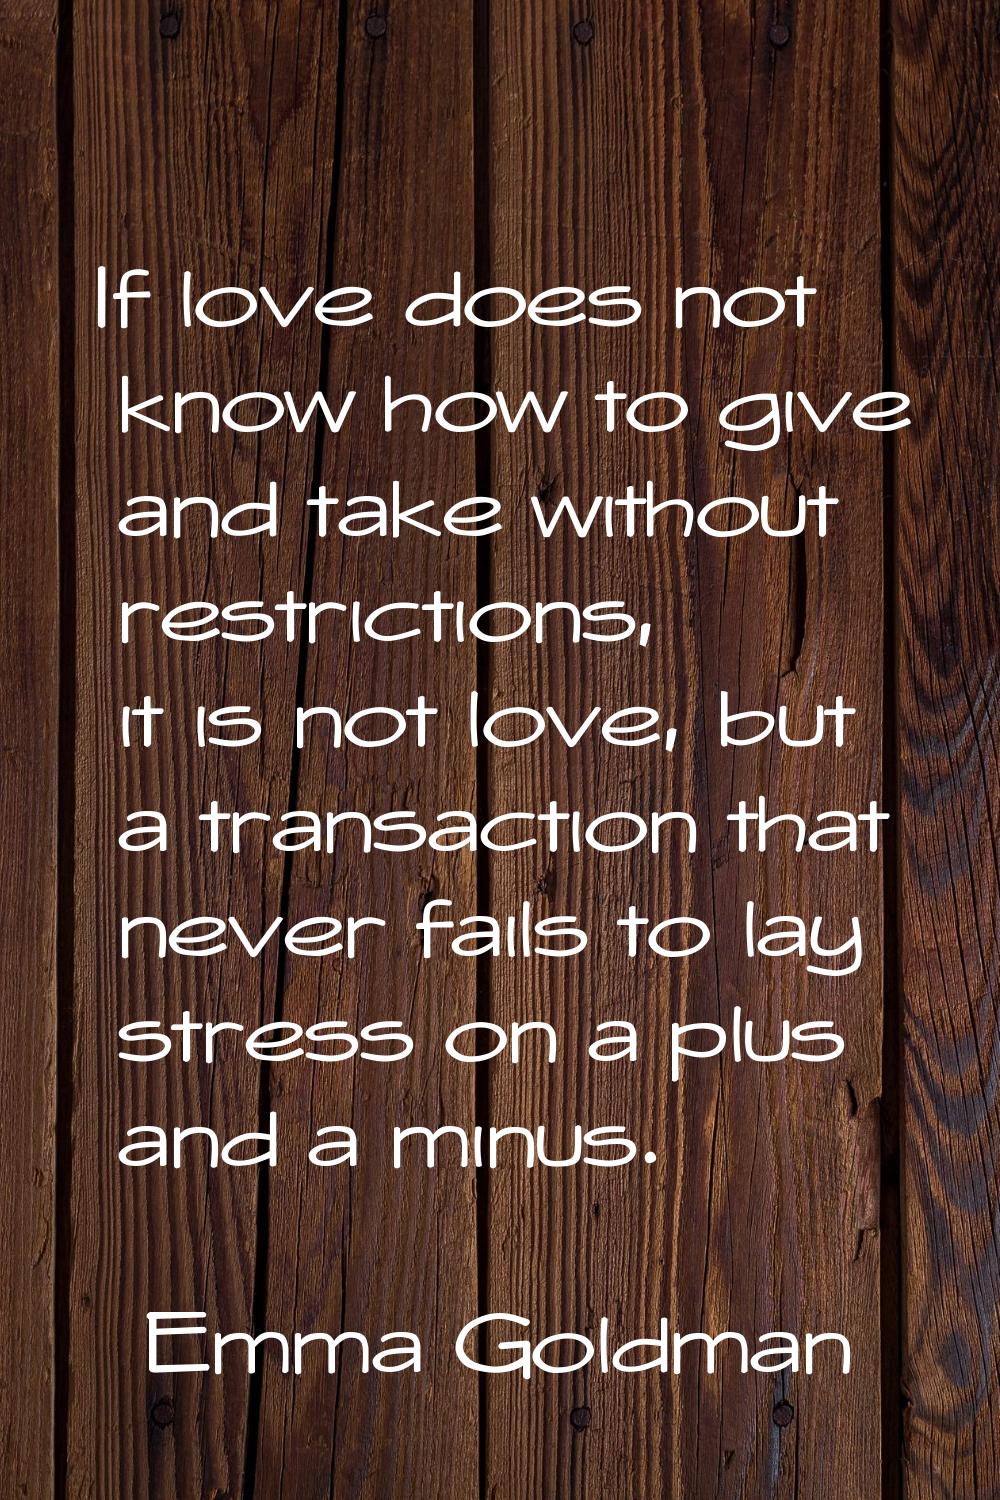 If love does not know how to give and take without restrictions, it is not love, but a transaction 